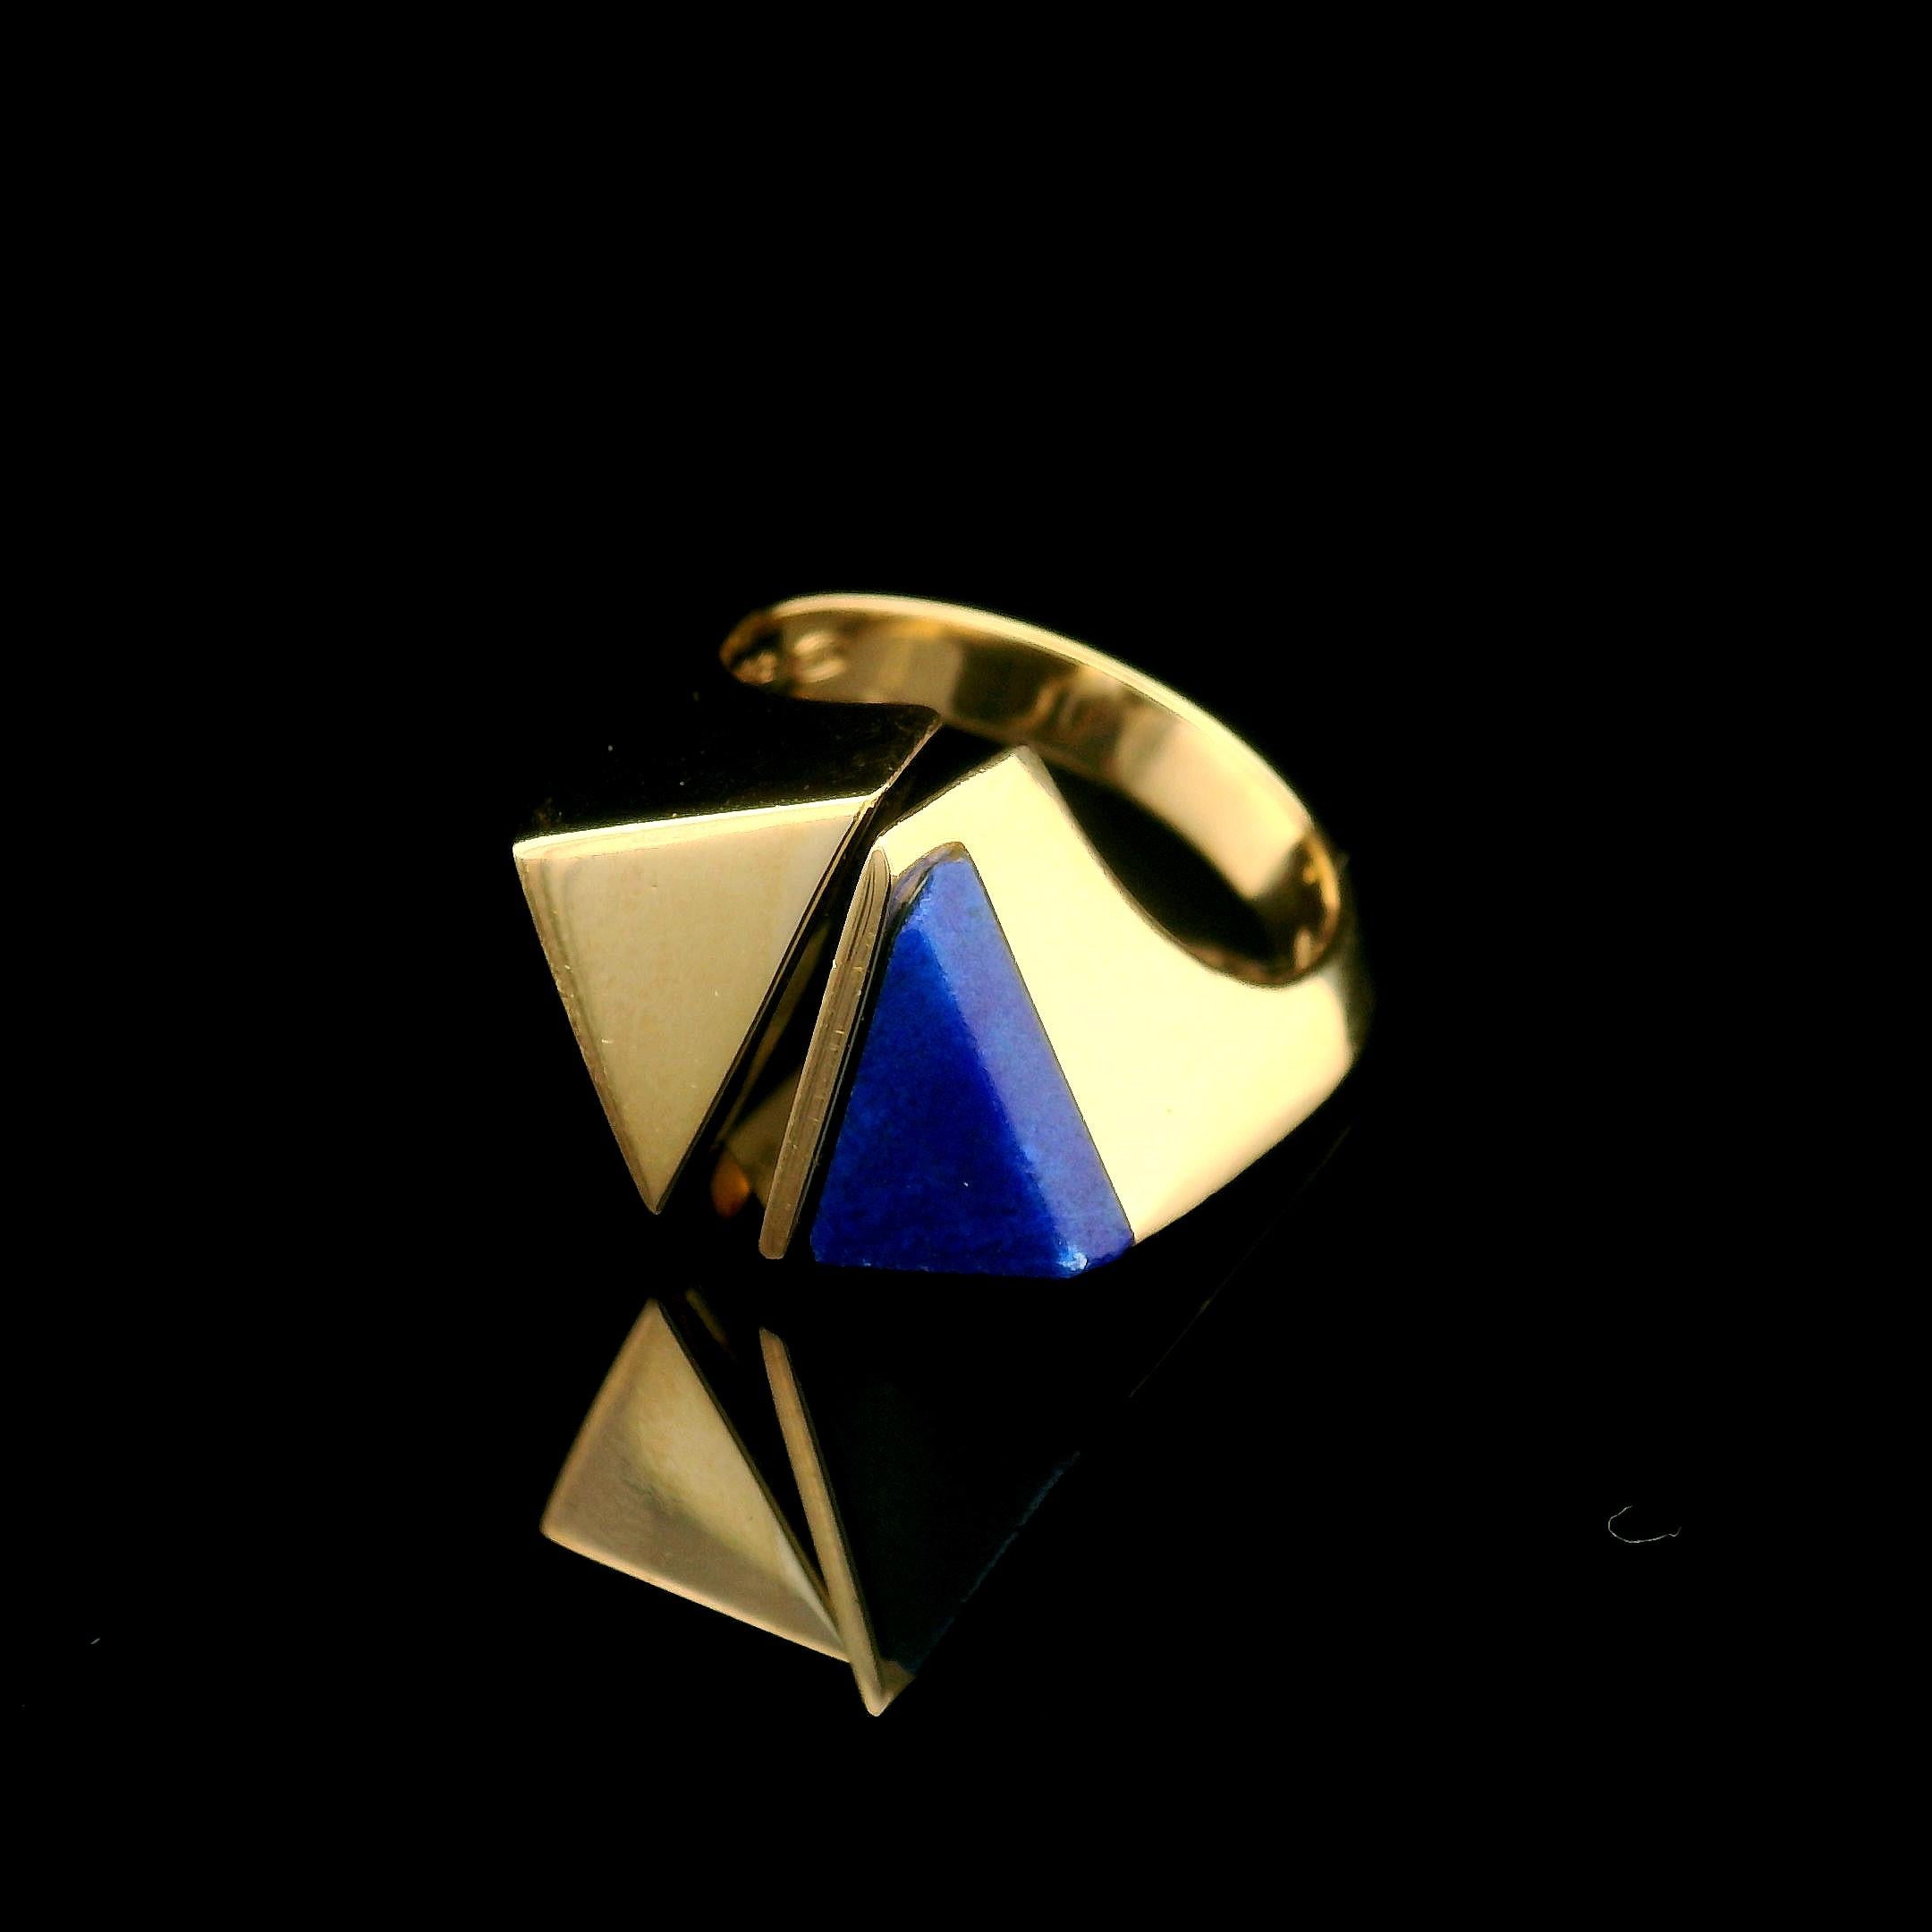 –Stone(s)–
(1) Natural Genuine Lapis - Custom Triangular Cut- Inlay - Rich Cobalt Blue - 10.7 x 6.7mm (approx.)
Material: Solid 18k Yellow Gold
Weight: 10.13 Grams
Ring Size: 6.5 ( fitted on finger, item can not be sized)
Ring Width: 13.75mm (0.54